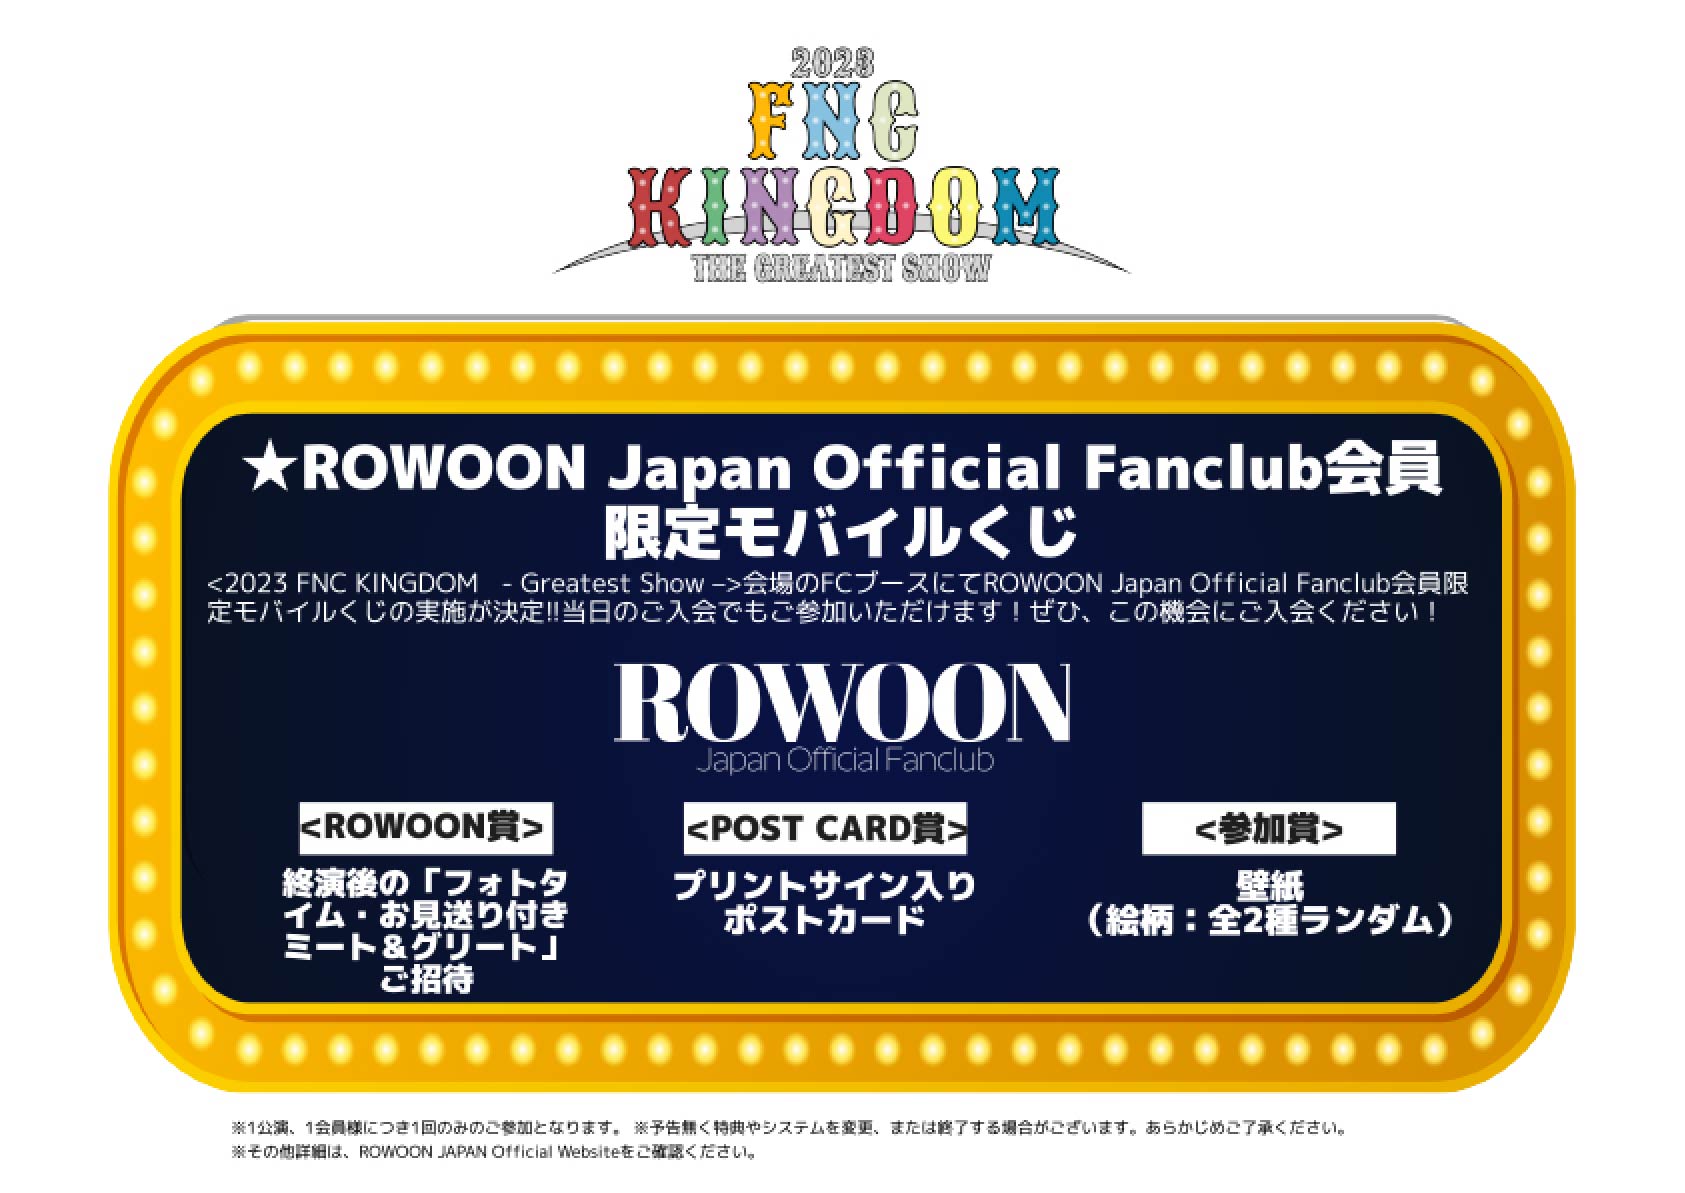 2023 FNC KINGDOM - The Greatest Show -」会場にて、ROWOON Japan ...